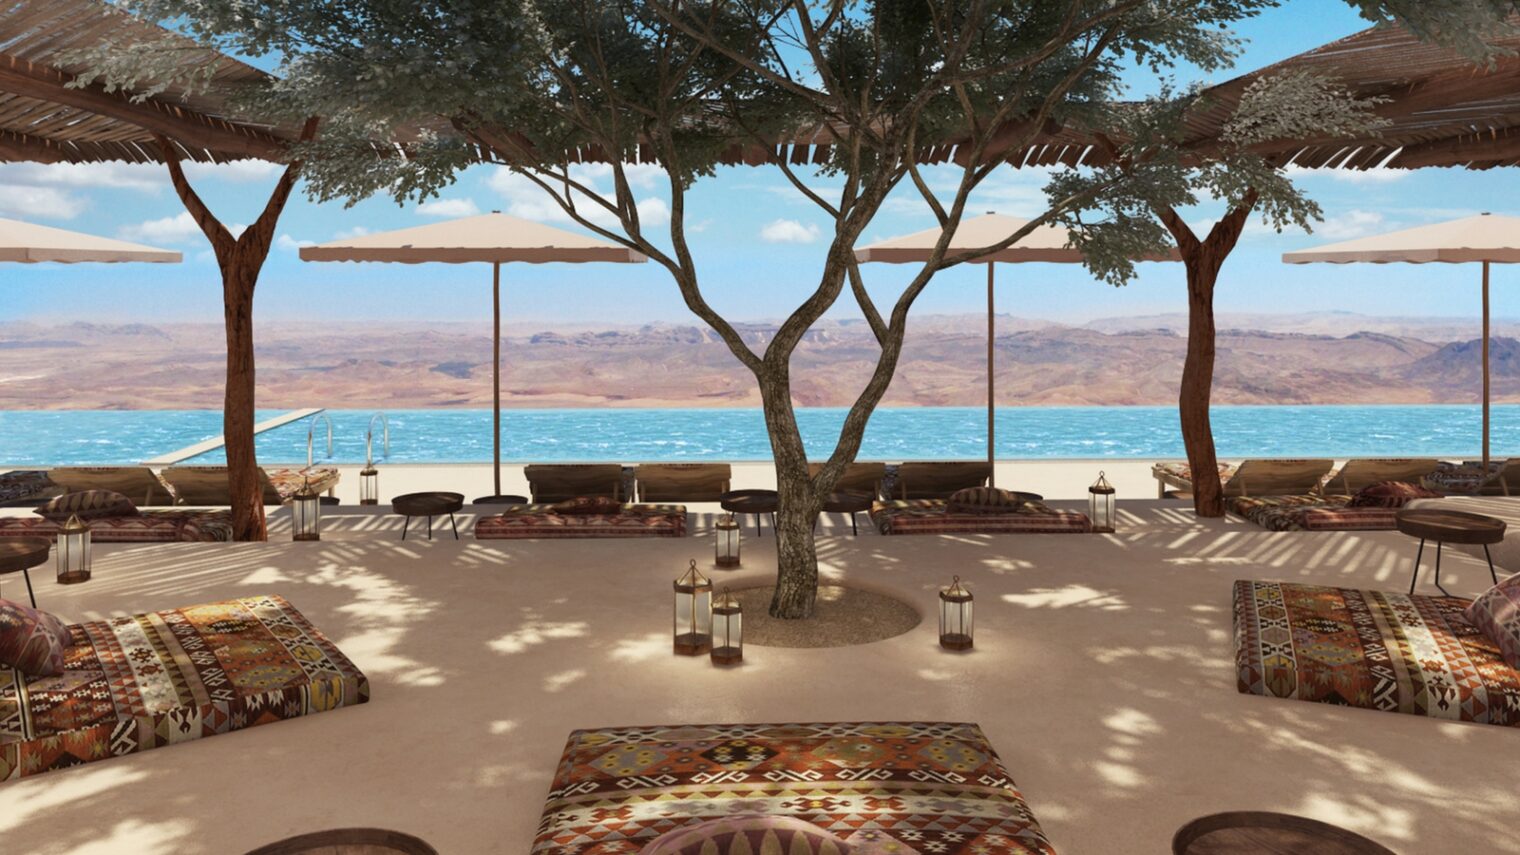 The view from Six Senses Shaharut, located in the south of Israel in the Negev’s Arava Valley. Photo courtesy of Six Senses